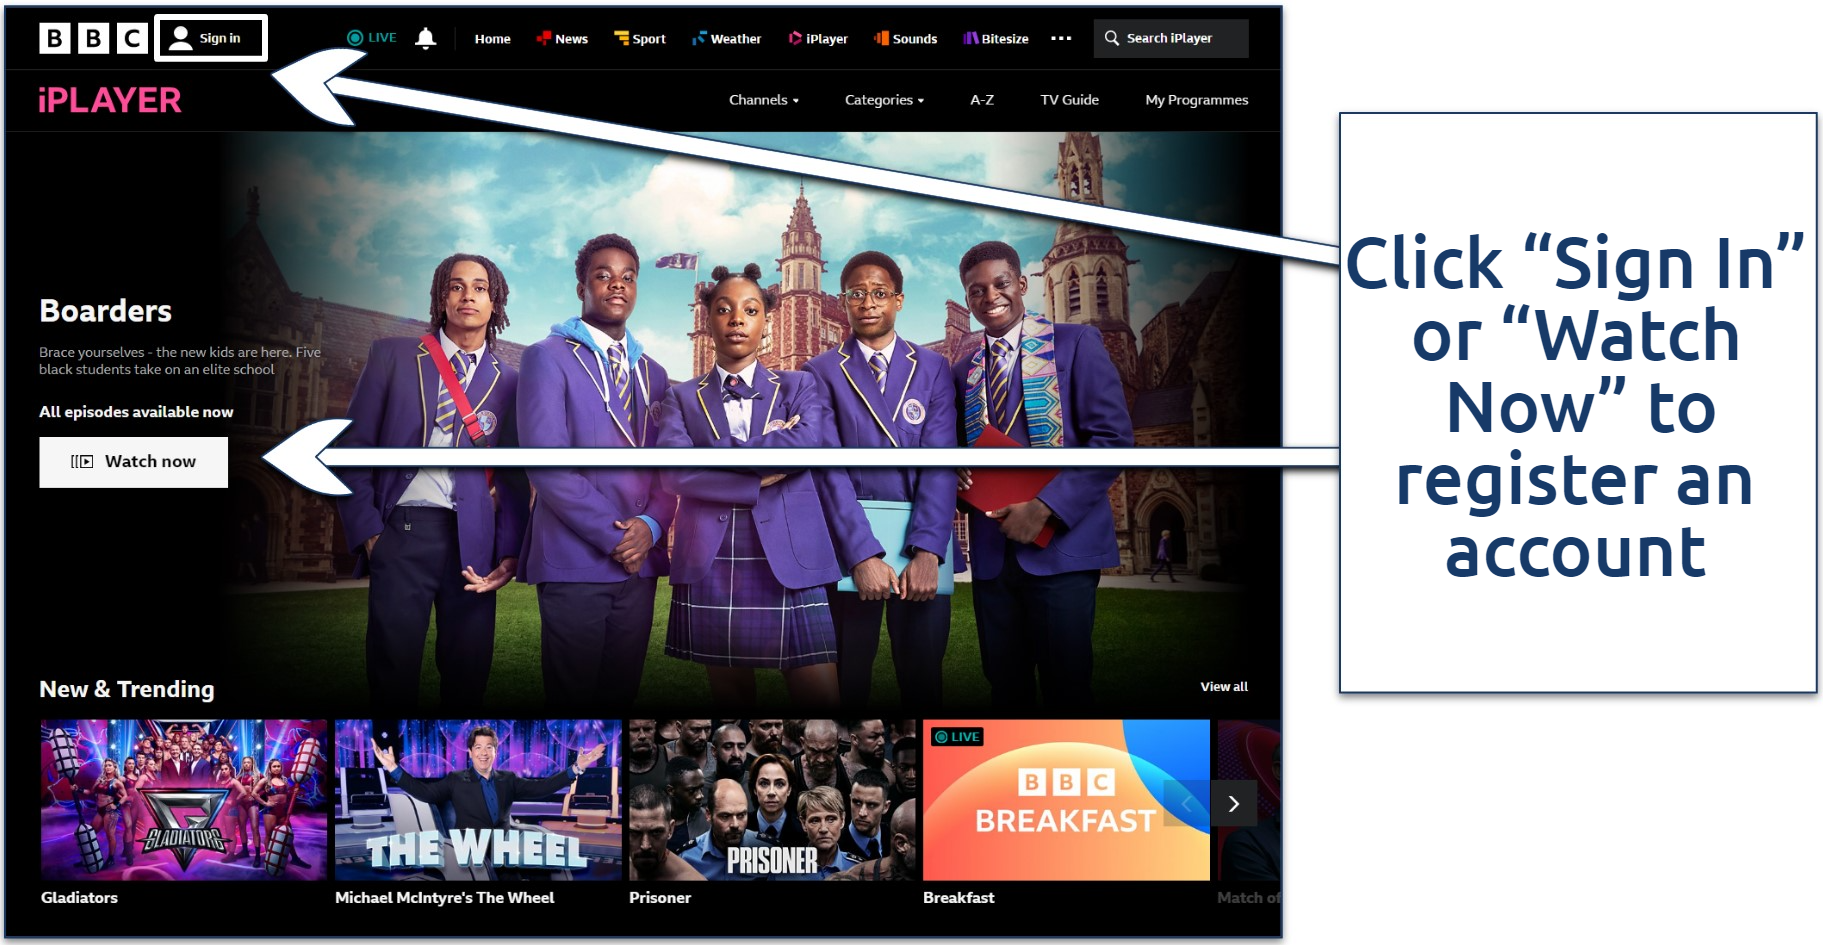 A screenshot of the BBC iPlayer homepage with the options to sign in highlighted.